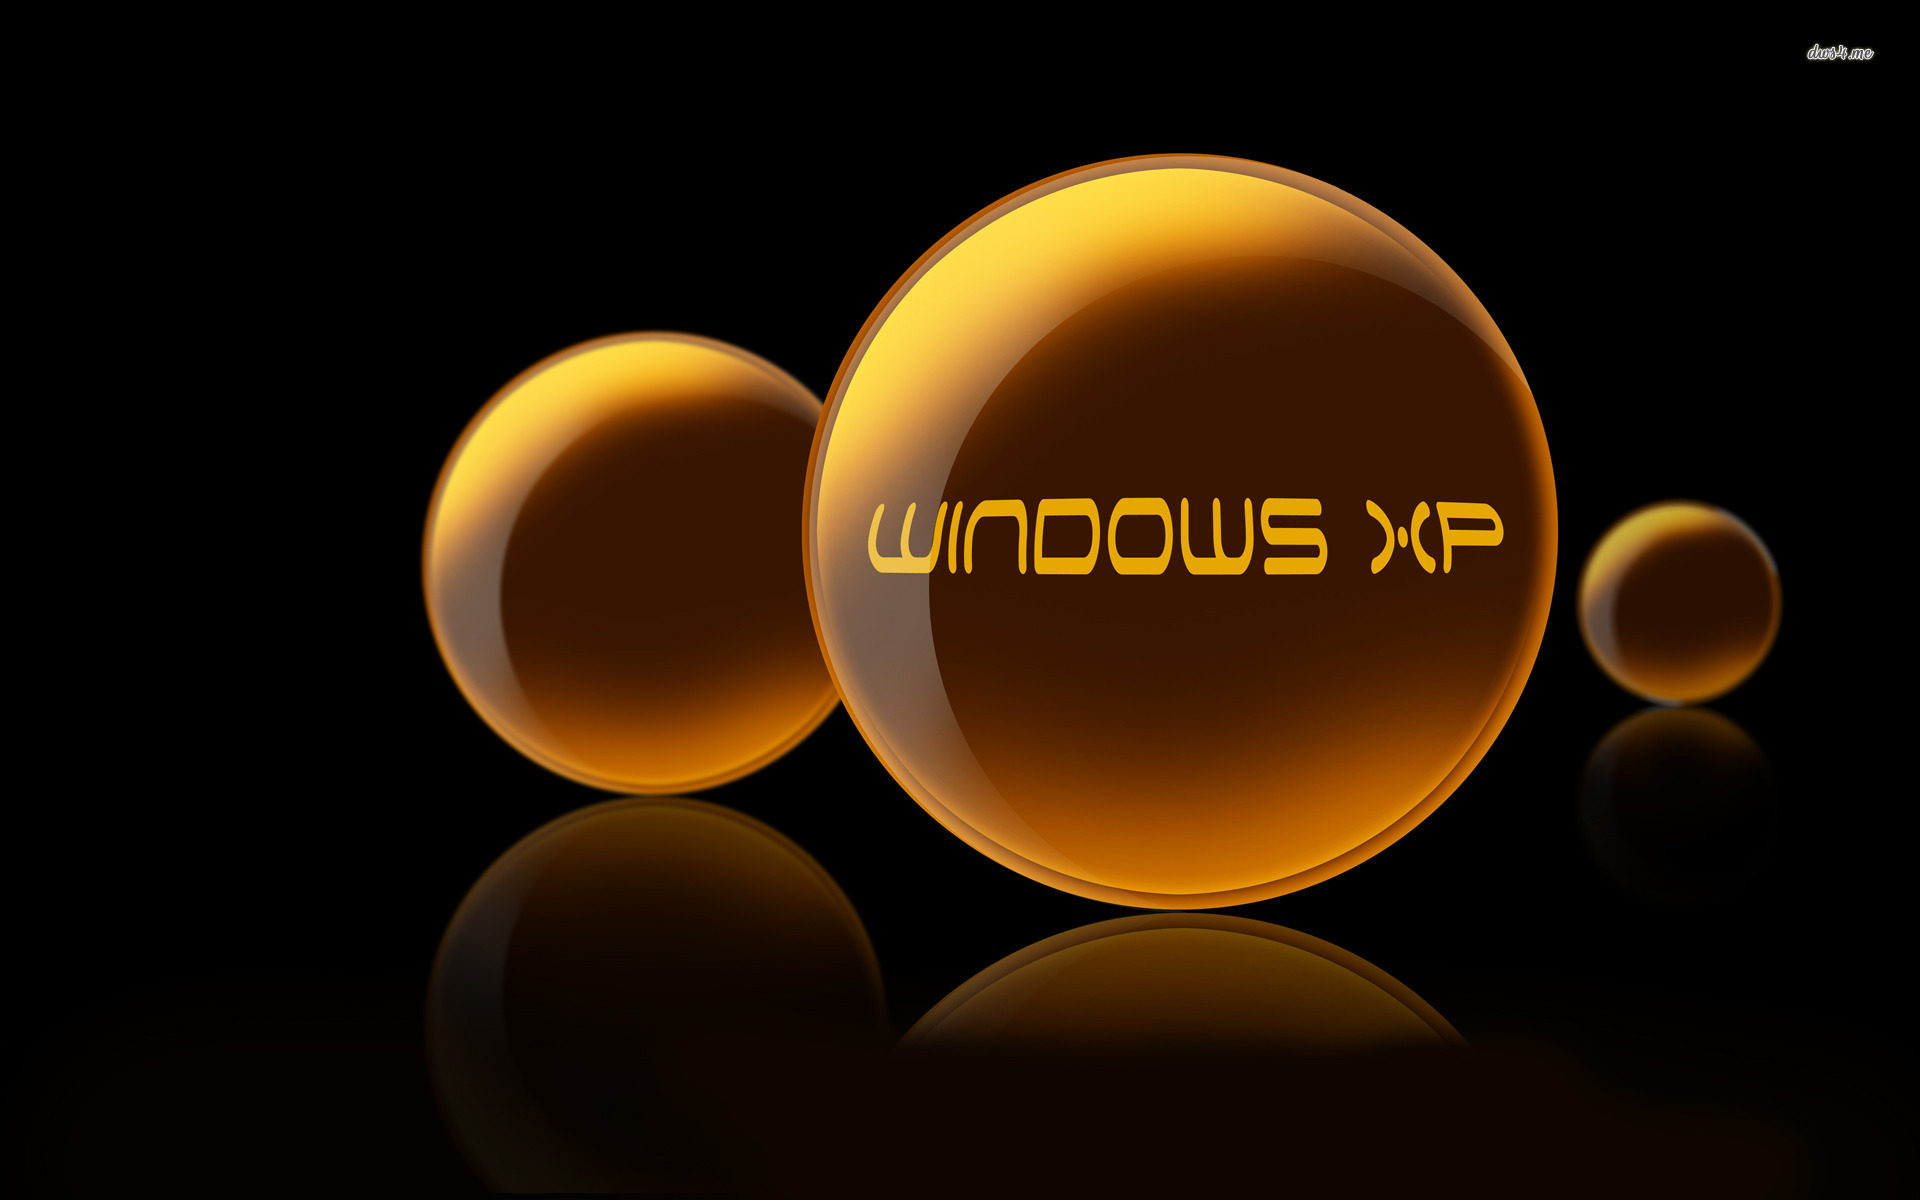 Windows Xp Wallpaper - Windows Xp Wallpaper 3d , HD Wallpaper & Backgrounds